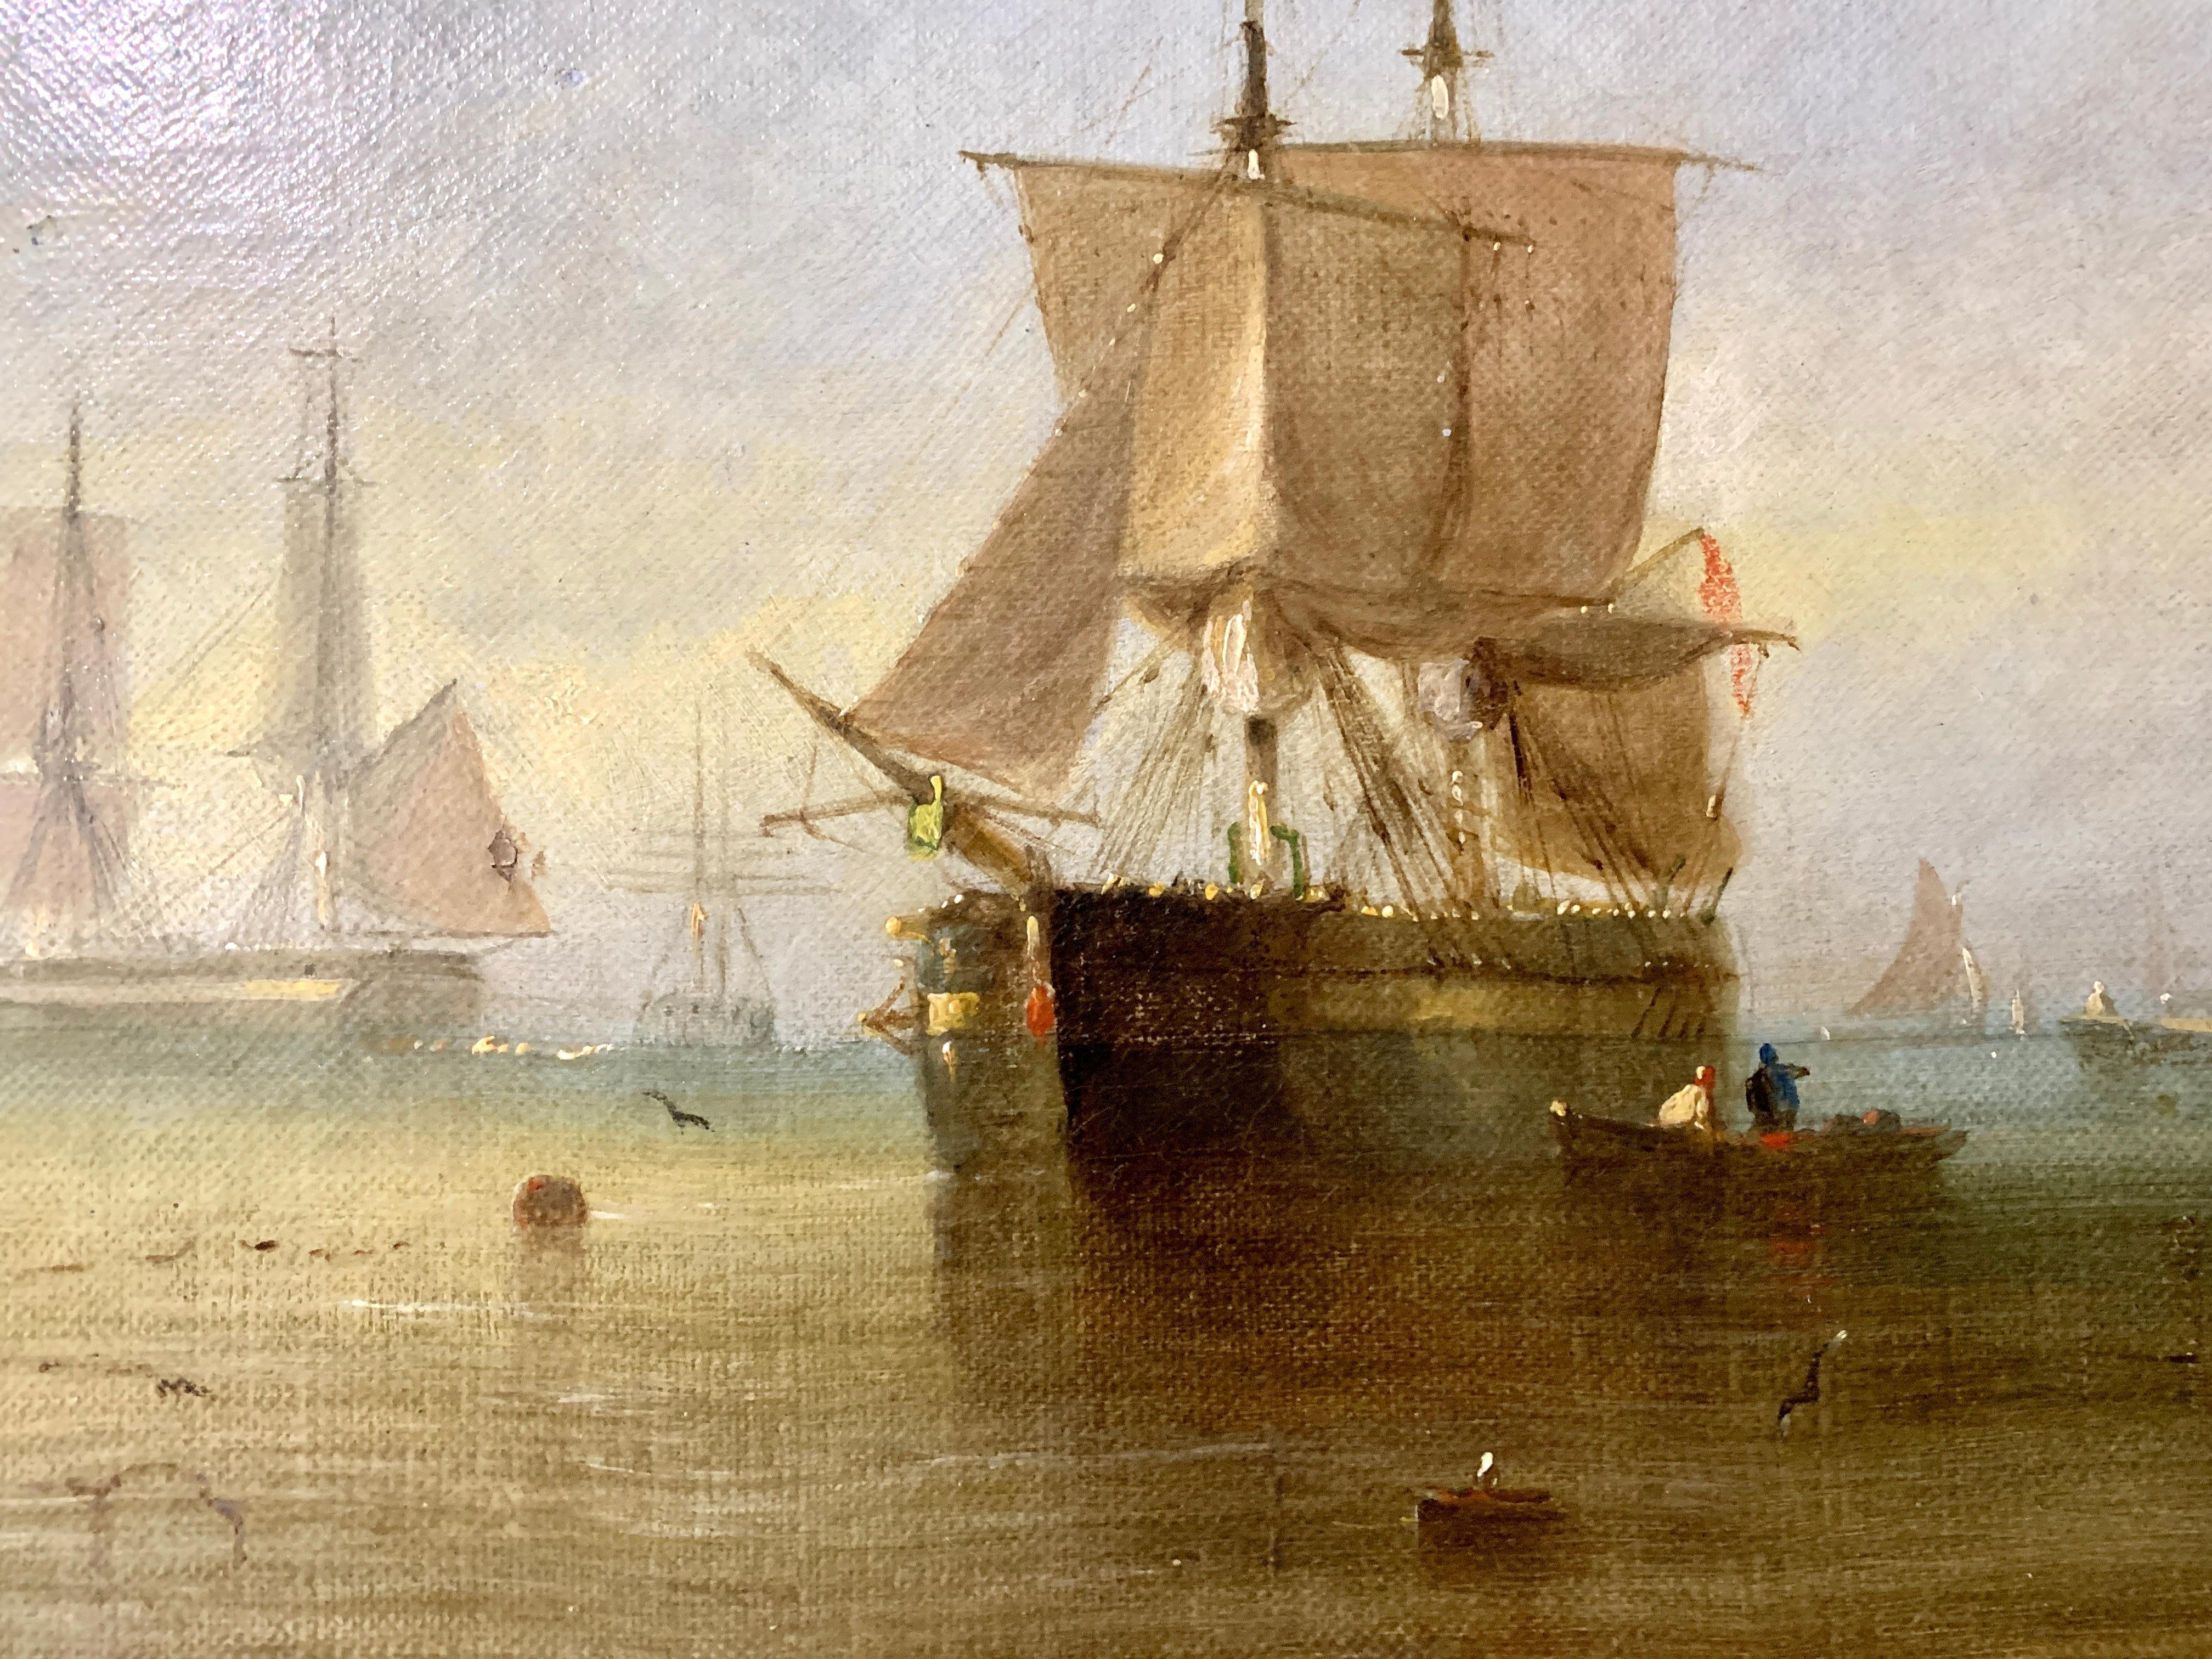 William Calcot Knell

English marine painting of ships at rest with a Sunset.

Oils on canvas

Circa 1870-80

William Callcott Knell was a London marine painter, probably the son of William Adolphus Knell, who was also a marine painter.

Callcott